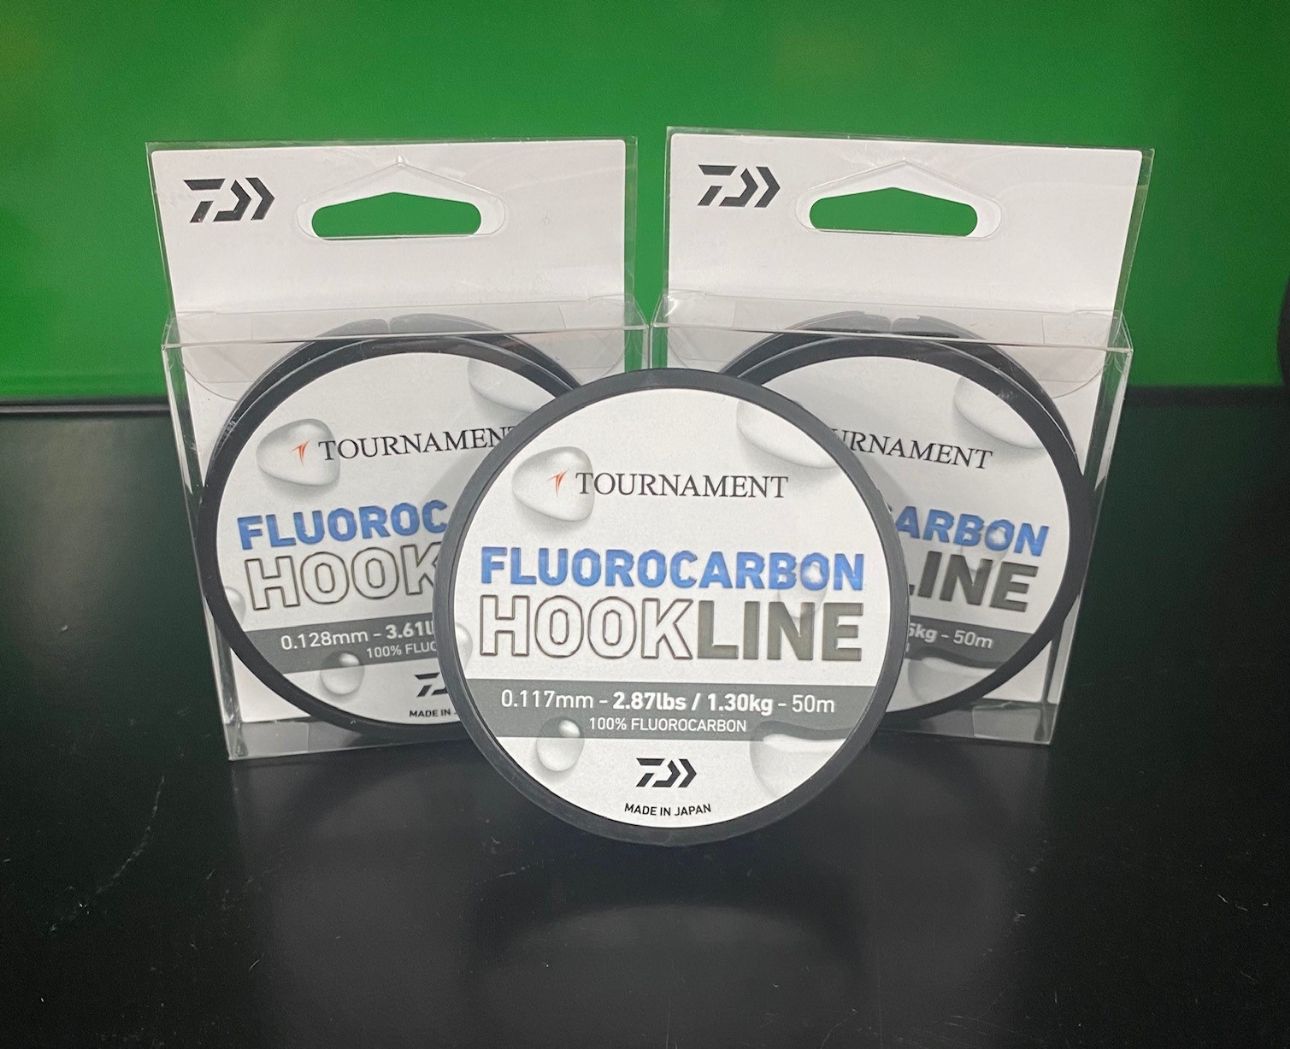 https://www.predatortackle.co.uk/Terminal-Tackle/Line-and-Leader/Daiwa-Tournament-Fluorocarbon-Hook-Line-50m/DAWIA%20TOURNAMENT%20FLUOROCARBON%20HOOKLINE%20FROM%20PREDATOR%20TACKLE.jpg